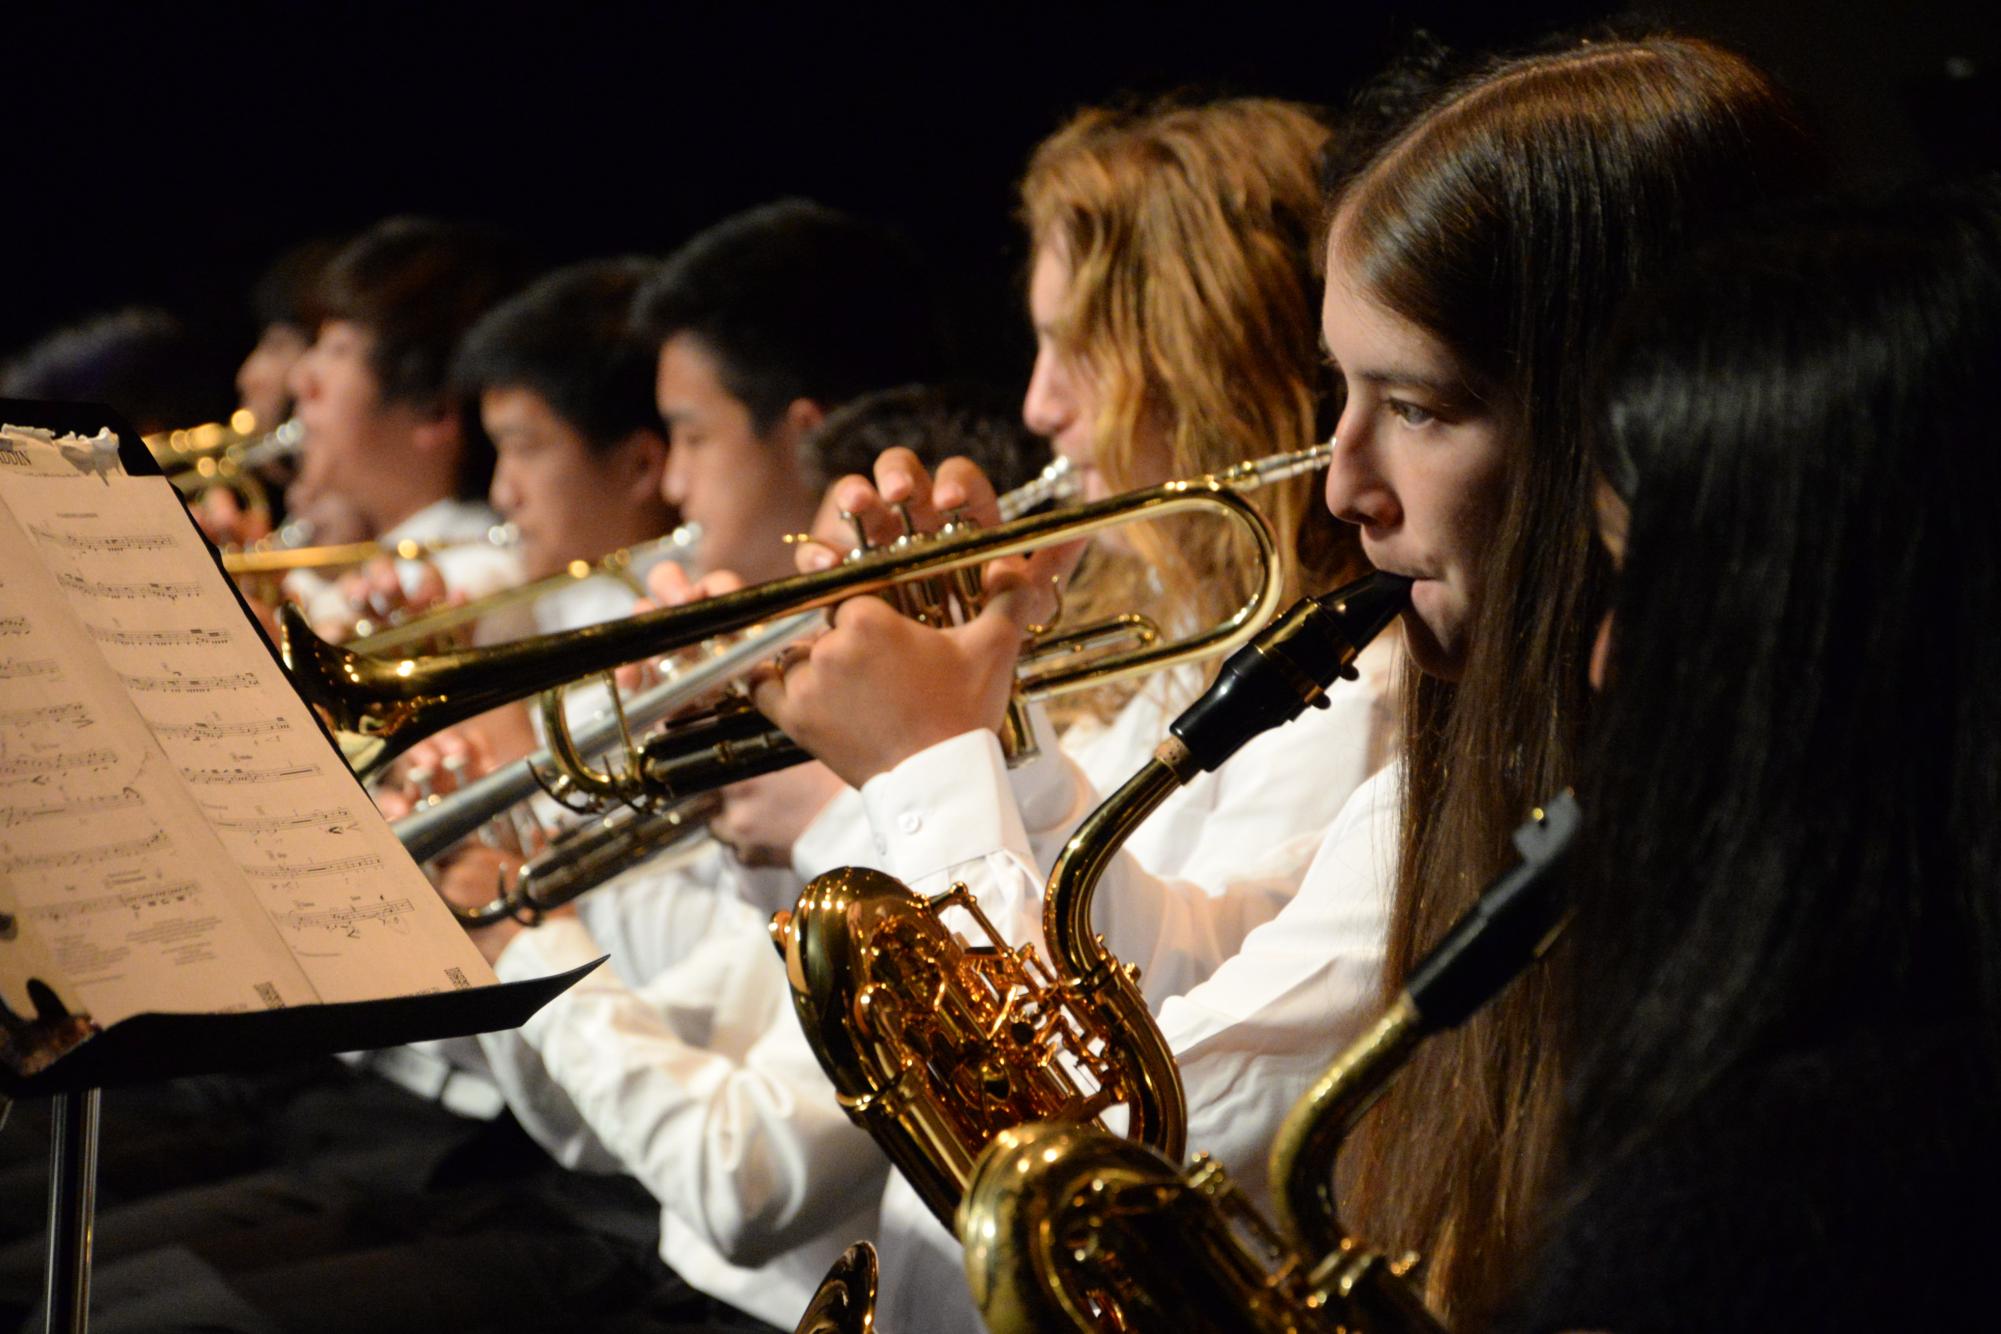 Music+department+ends+on+a+high+note+with+centennial+spring+concert%2C+senior+night+ceremony